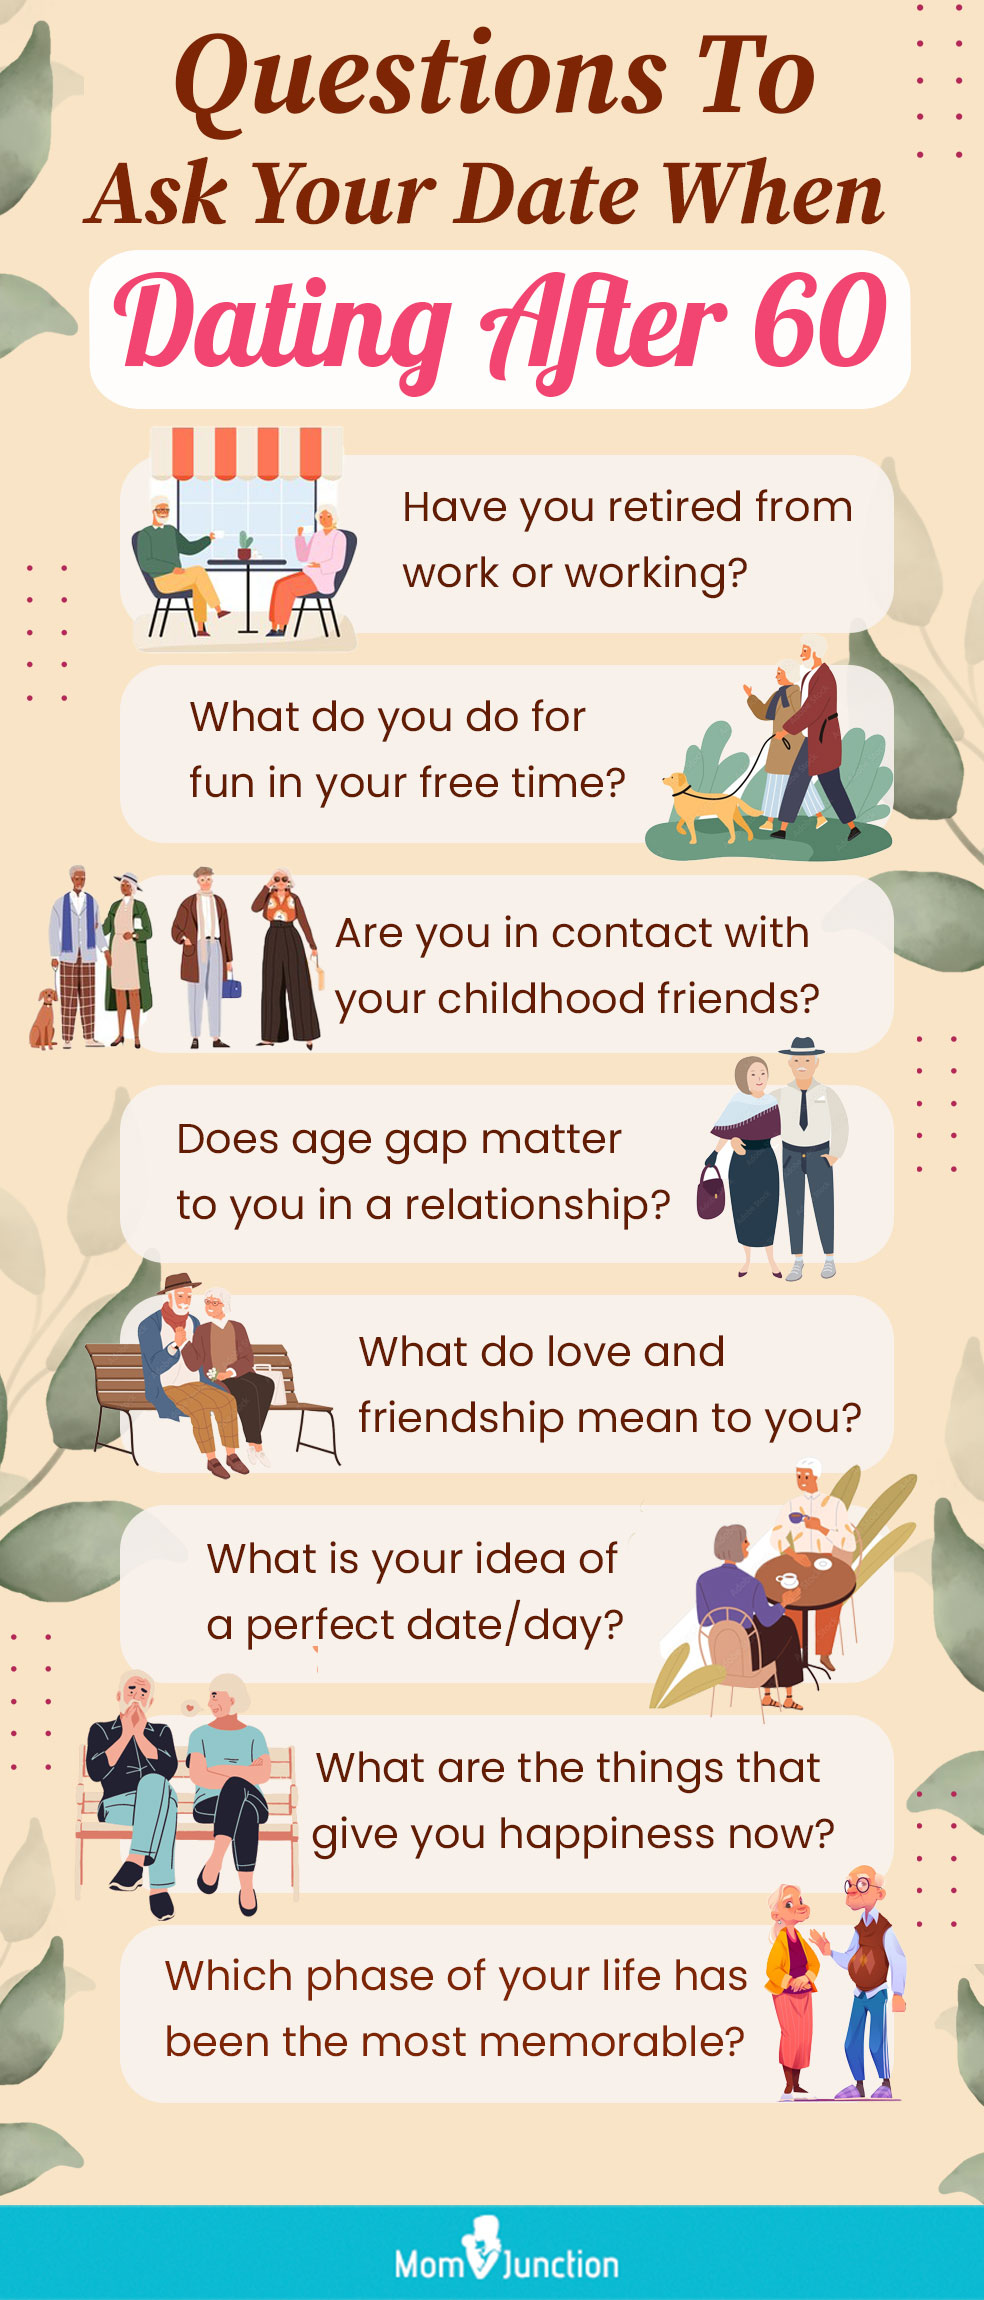 questions to ask to your date when dating after 60 (infographic)